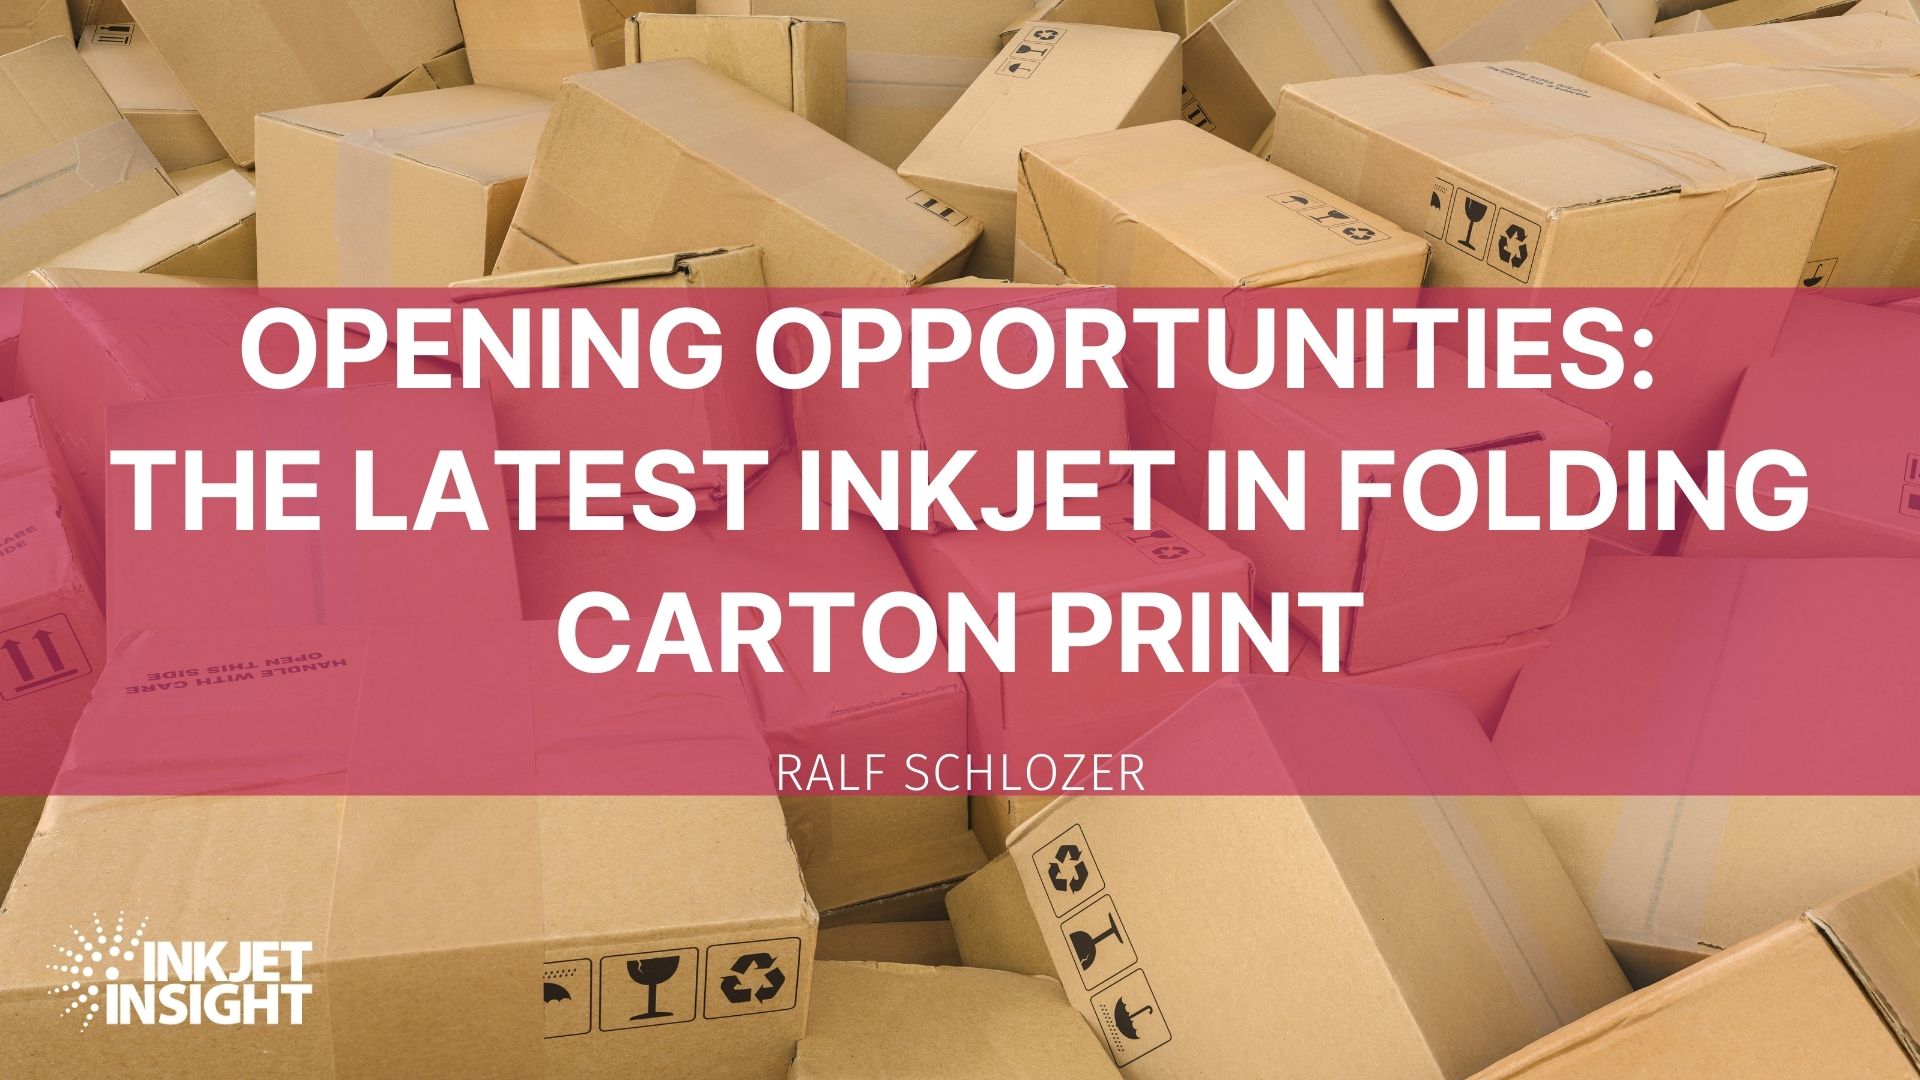 Featured image for “Opening Opportunities – The Latest Inkjet in Folding Carton Print”